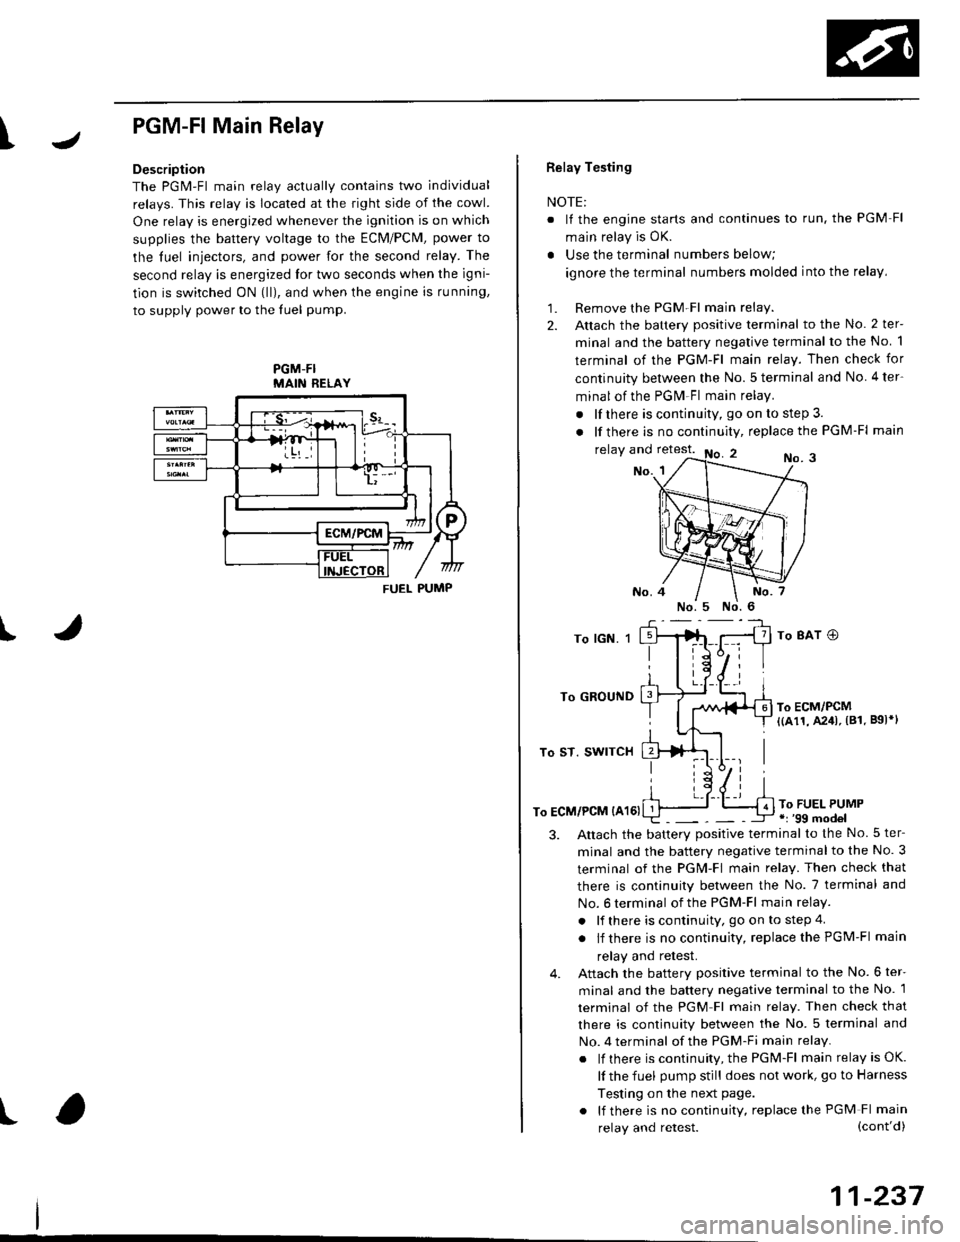 HONDA CIVIC 1998 6.G Workshop Manual I
PGM-FlMain Relay
Description
The PGM-Fl main relav actuallv contains two individual
relays. This relay is located at the right side of the cowl.
One relay is energized whenever the ignition is on wh